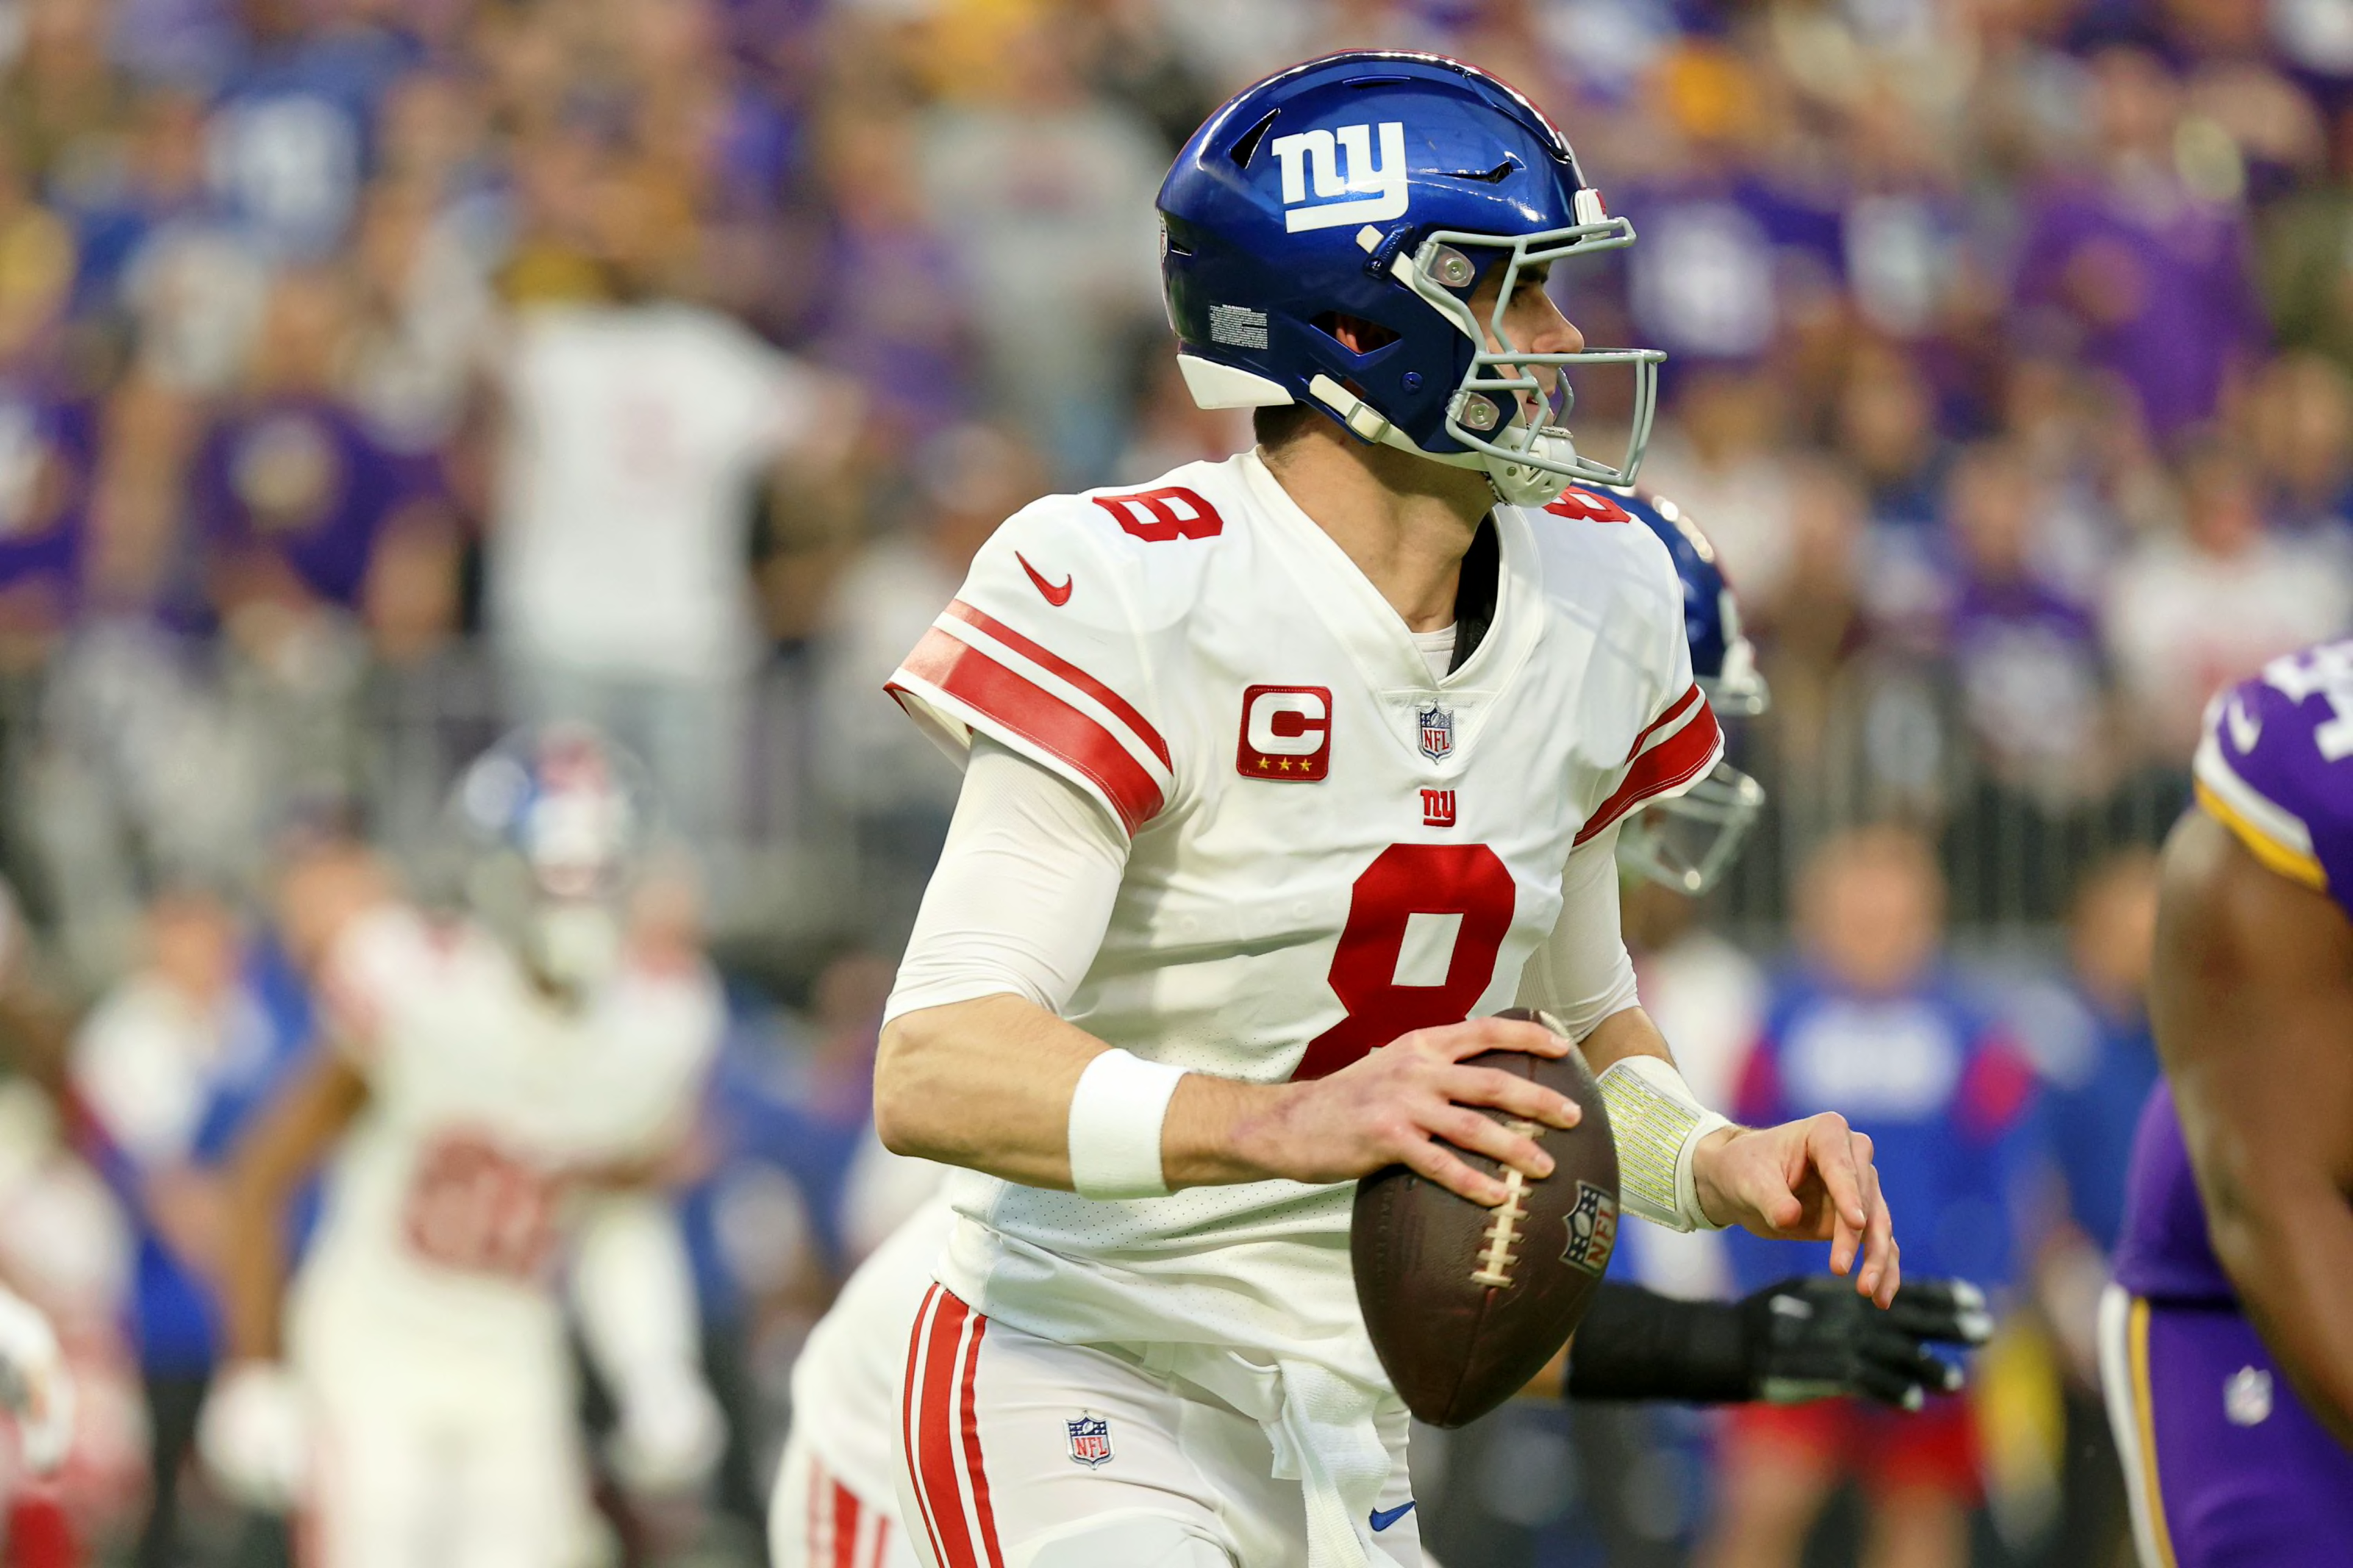 2023 NFL Wild Card round picks, predictions: Giants to win a